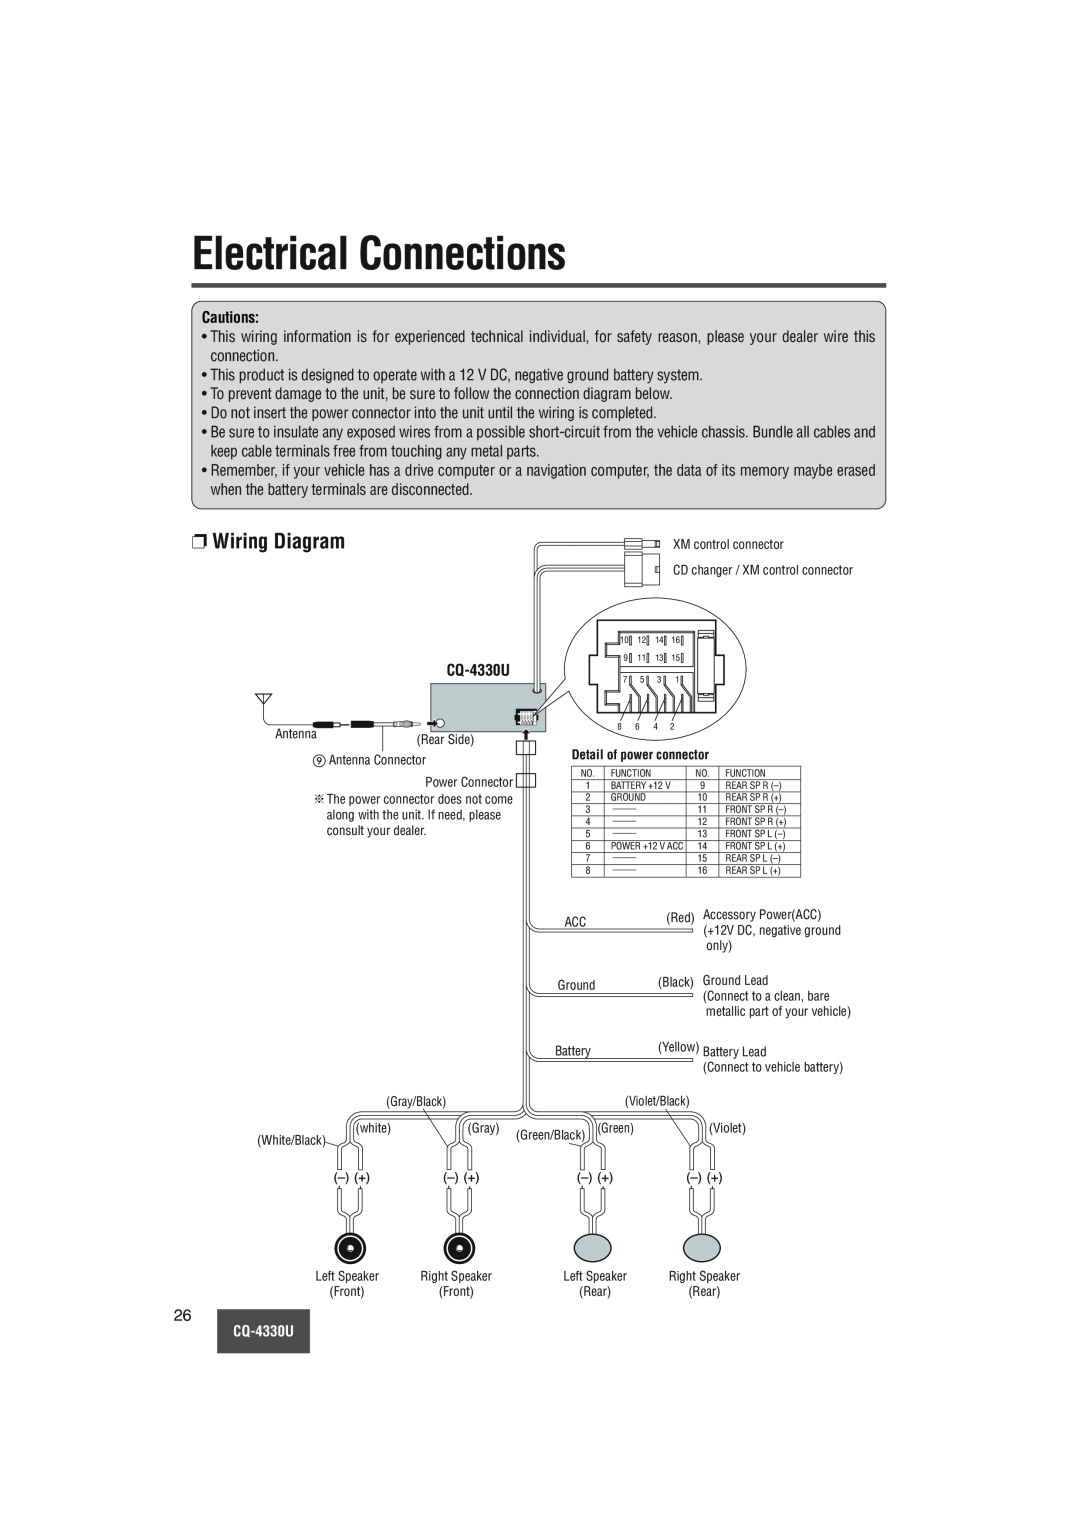 Panasonic CQ-4330U manual Electrical Connections, Wiring Diagram, Cautions 